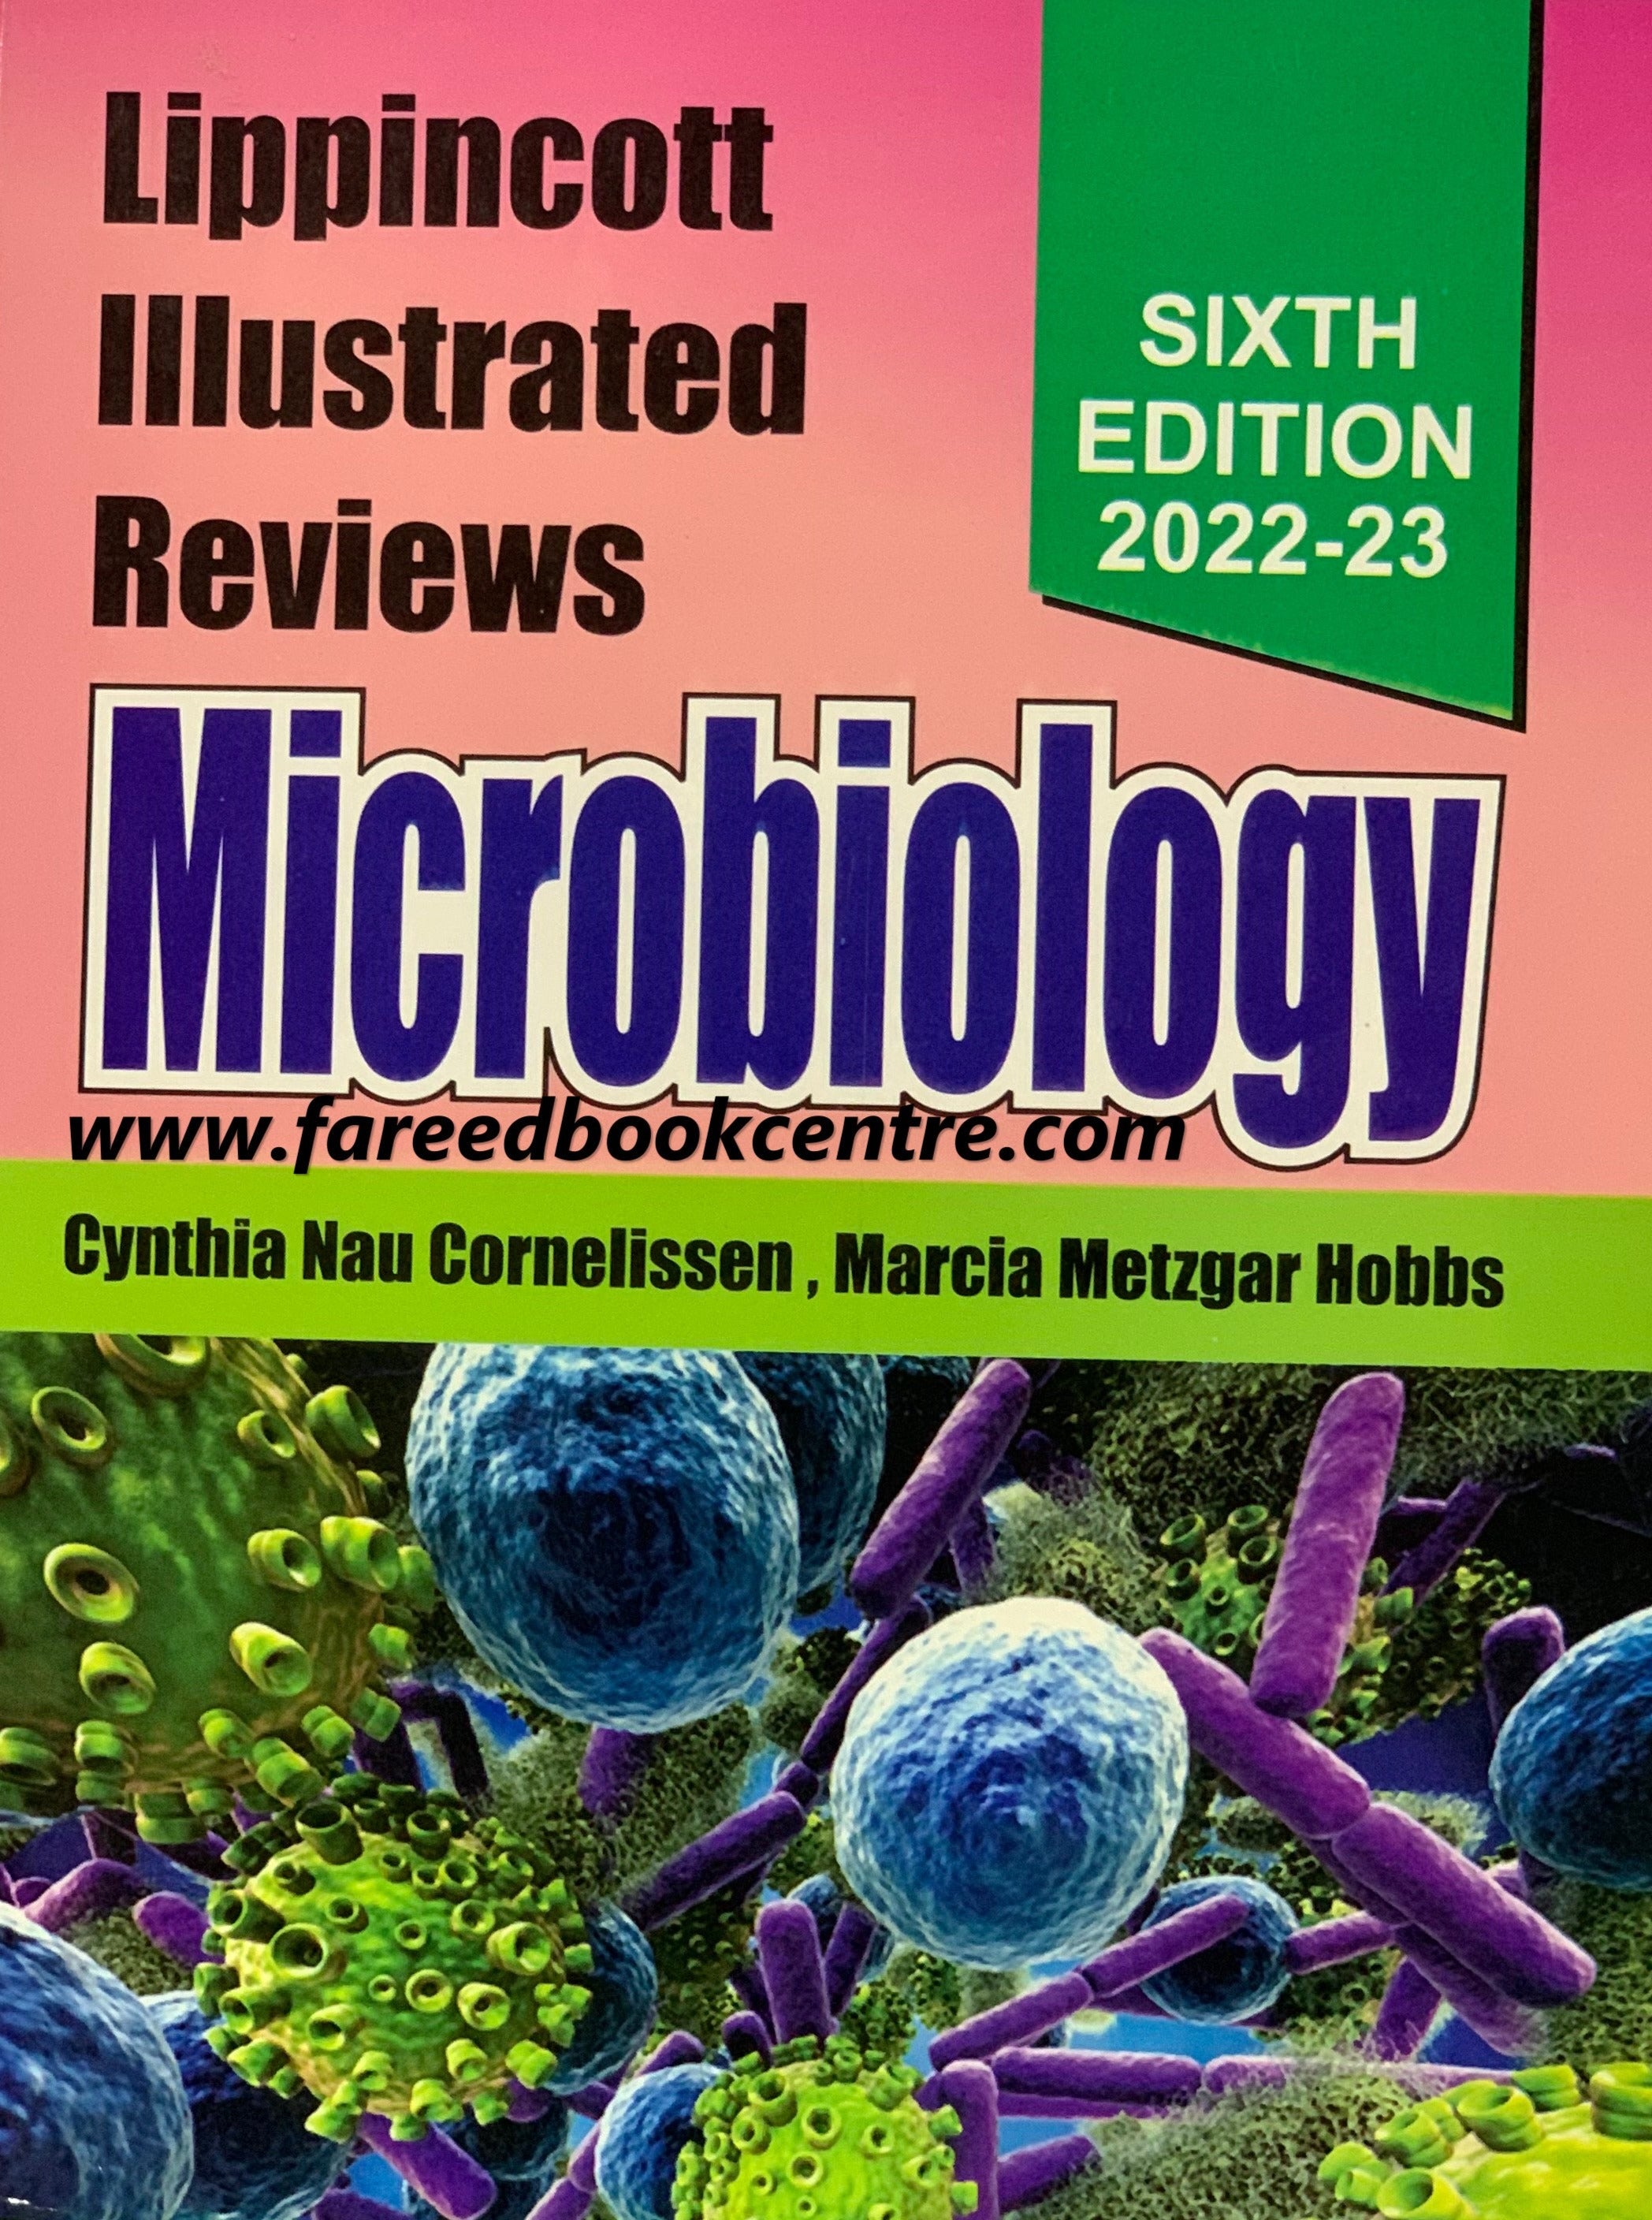 lippincotts illustrated reviews microbiology 3rd edition free download